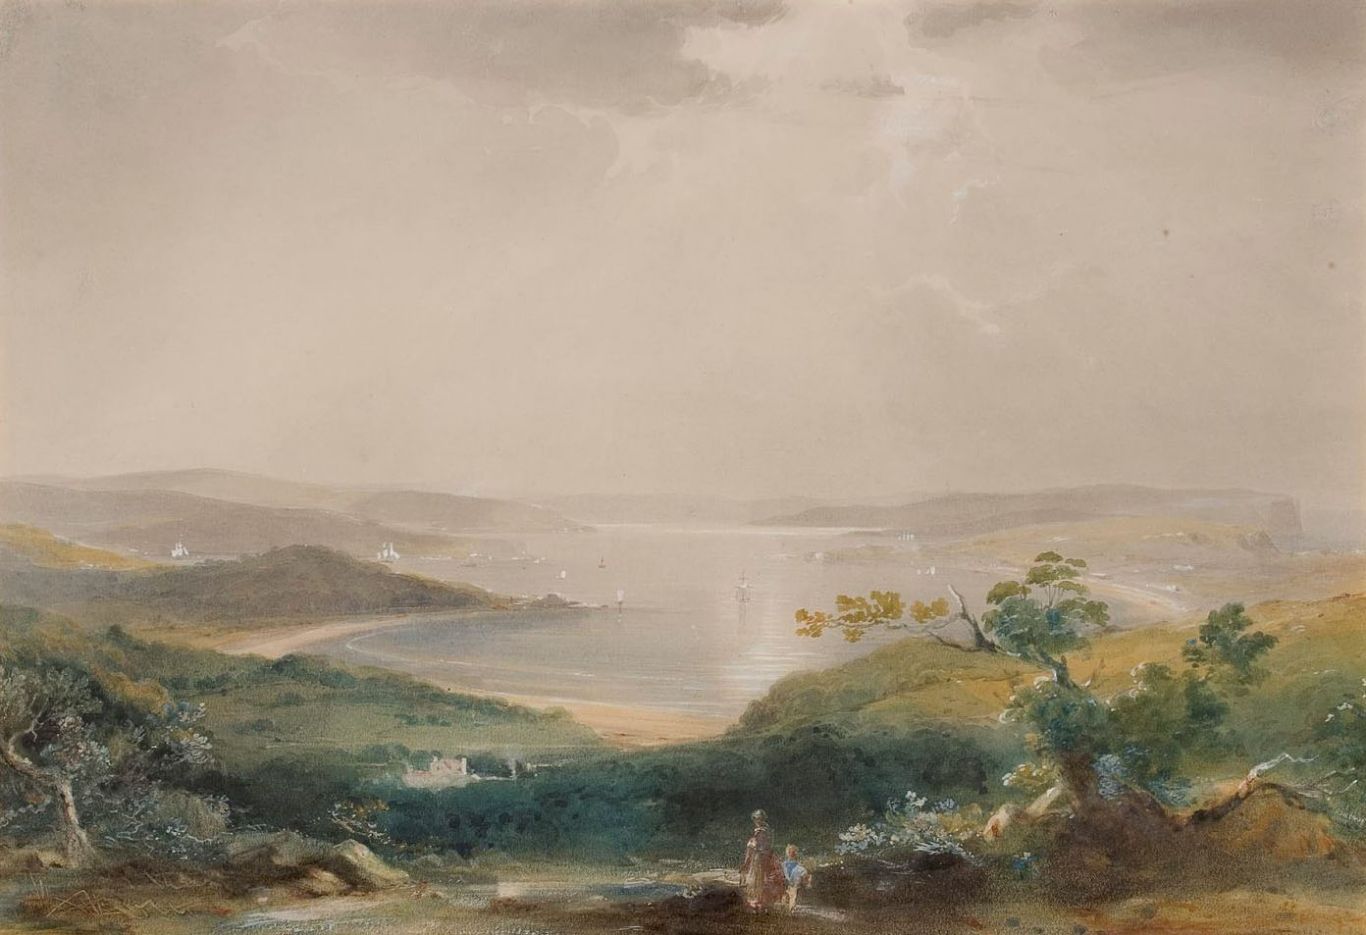 Painting showing green hills leading down to a harbour with a bright, cloudy sky.